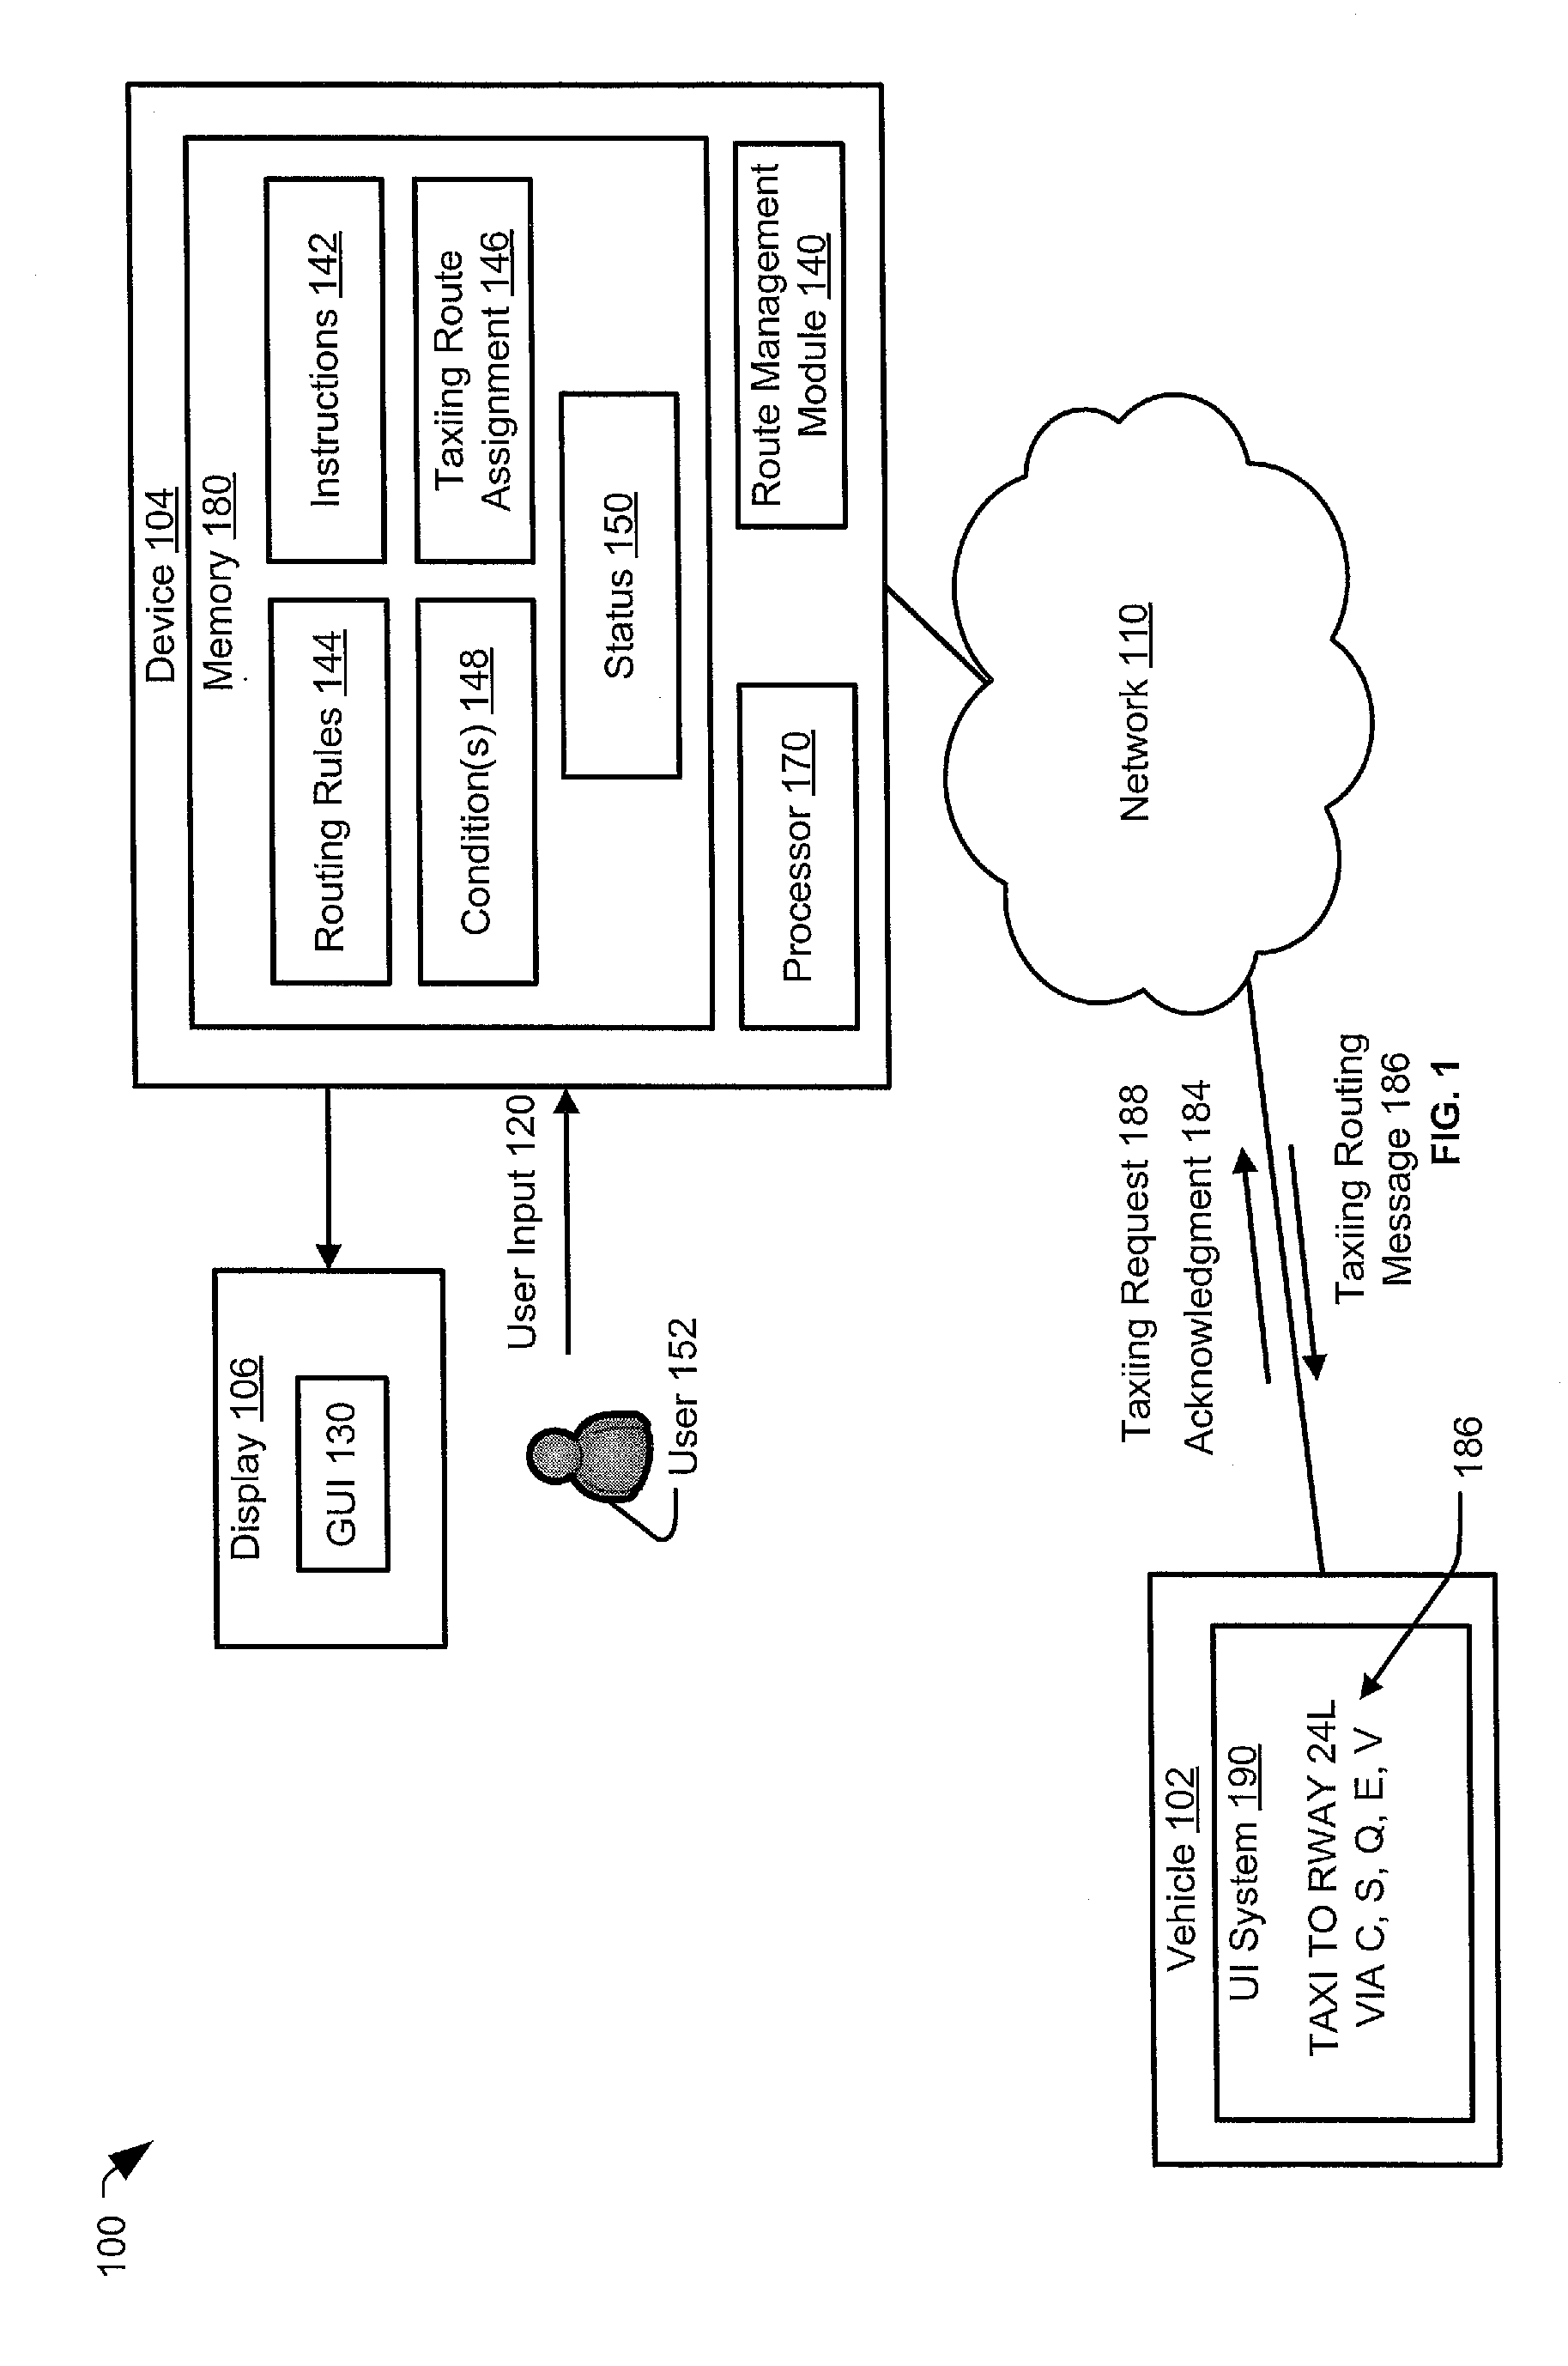 Systems and methods of airport traffic control